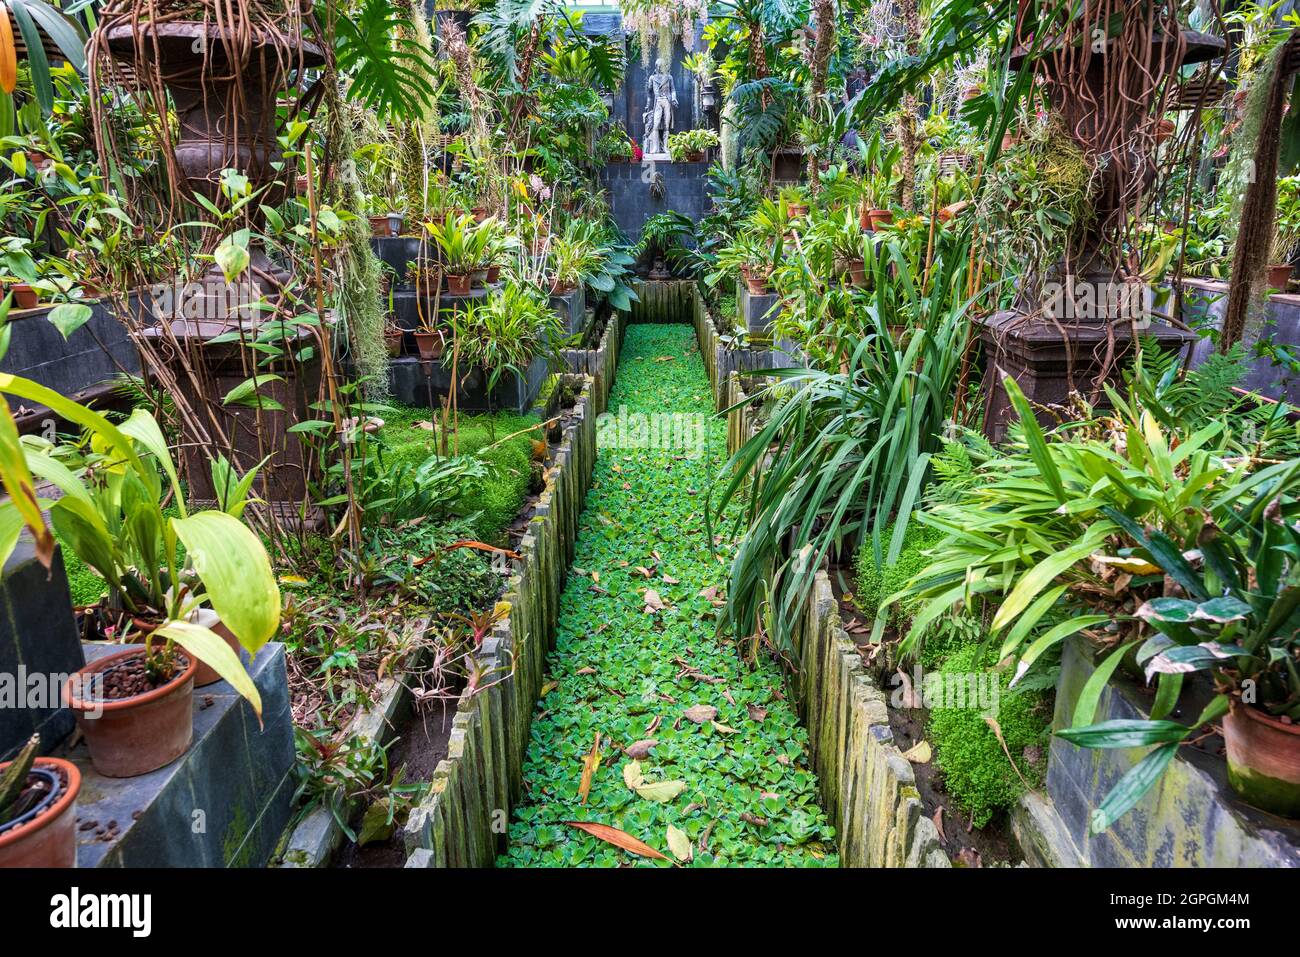 France, Eure, Sainte Opportune du Bosc, Castle and Battlefield Garden by interior designer Jacques Garcia, greenhouses with a collection of orchids Stock Photo